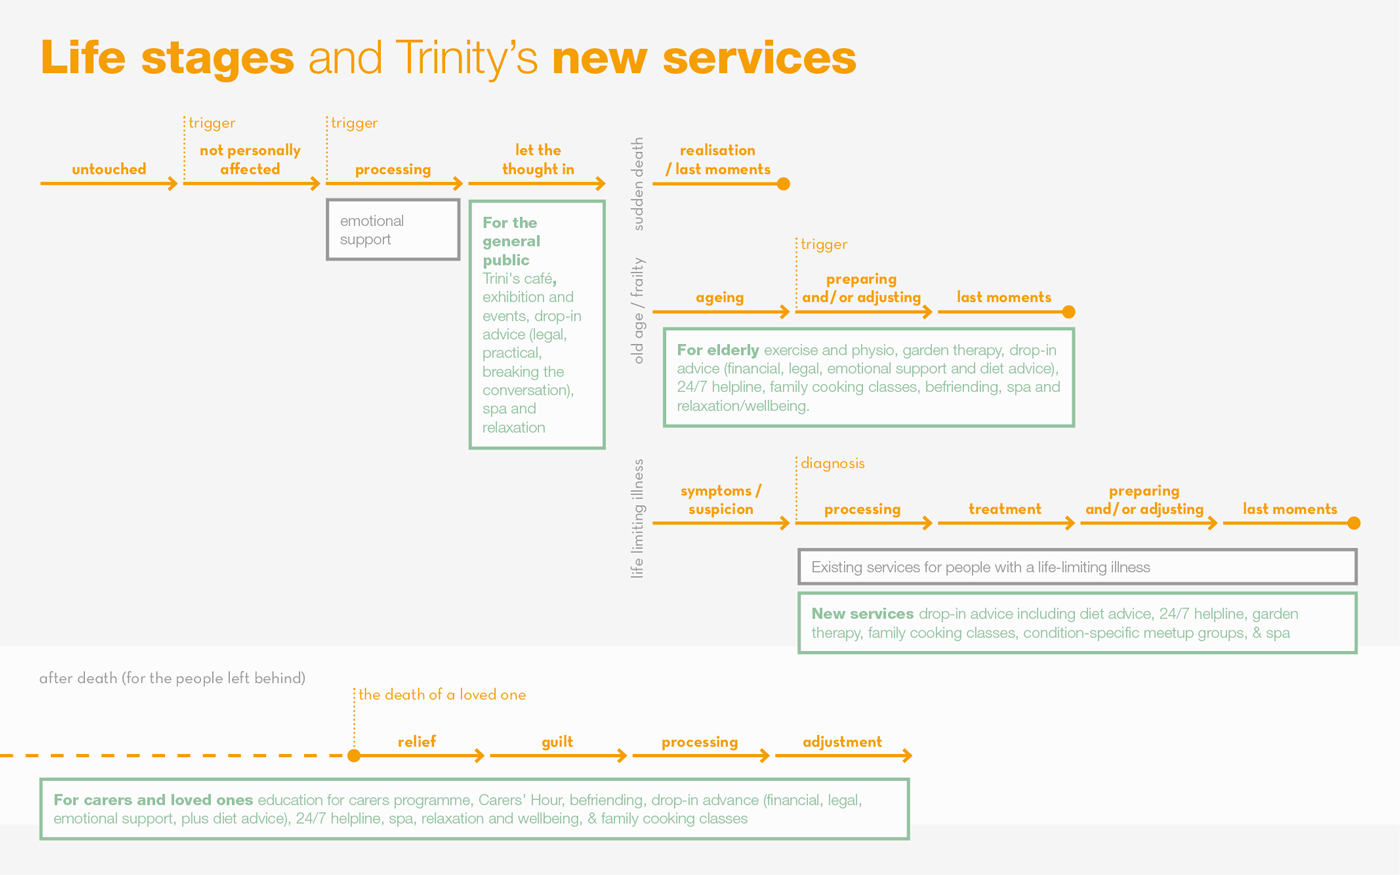 Life Stages - Services mapped